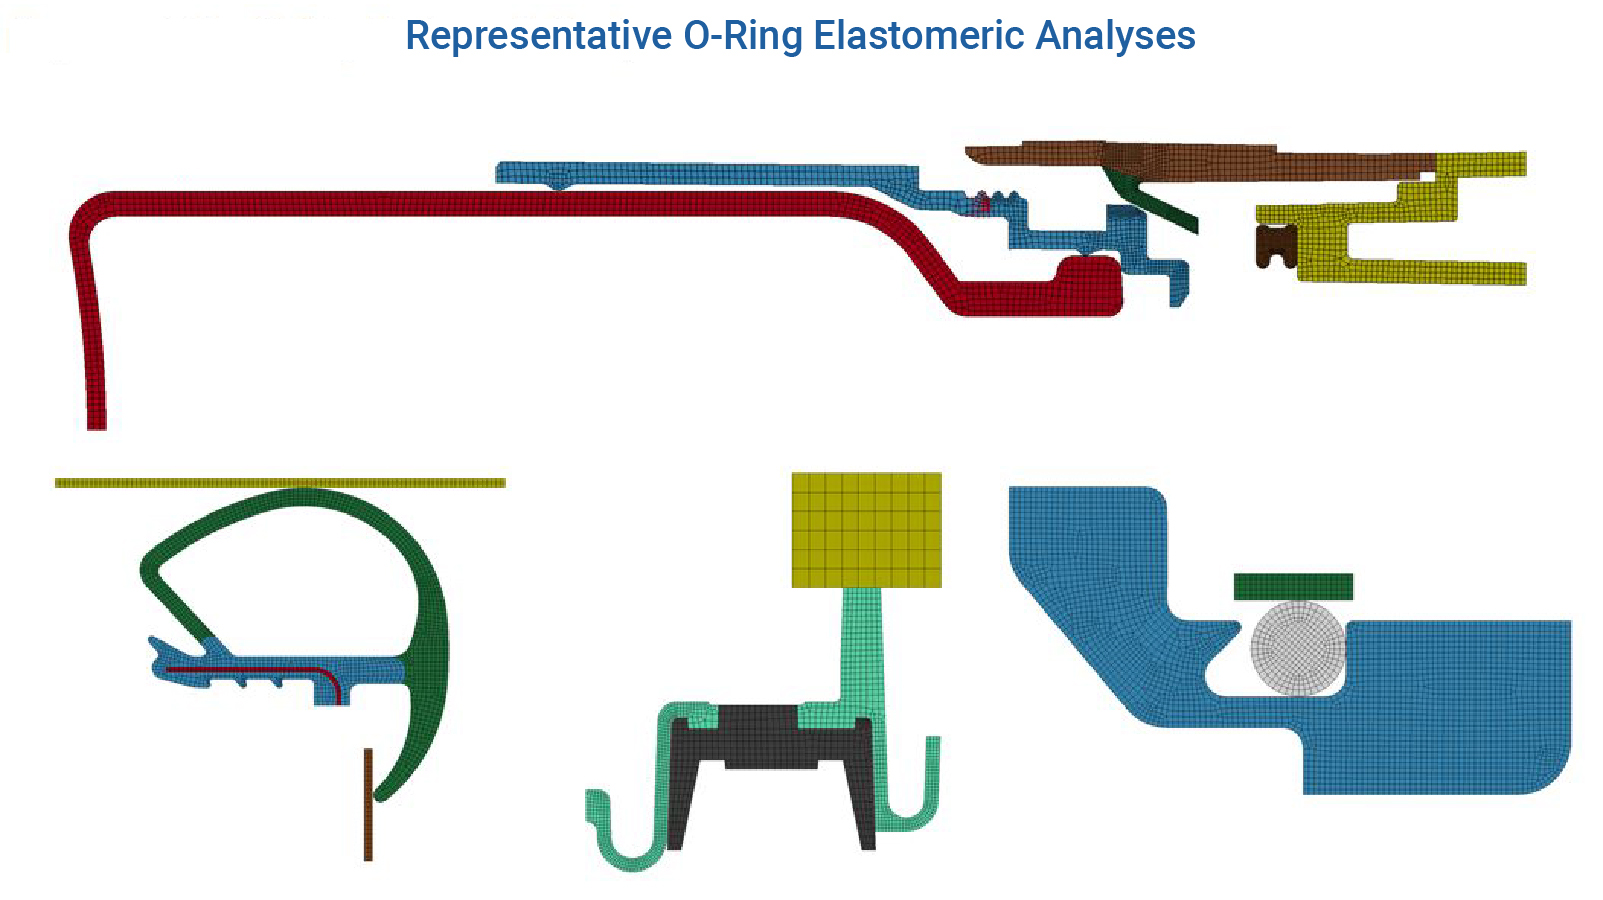 Figure 1 - Different O-Ring simulations from 2-D to Axisymmetric - LS-DYNA Consulting Services 